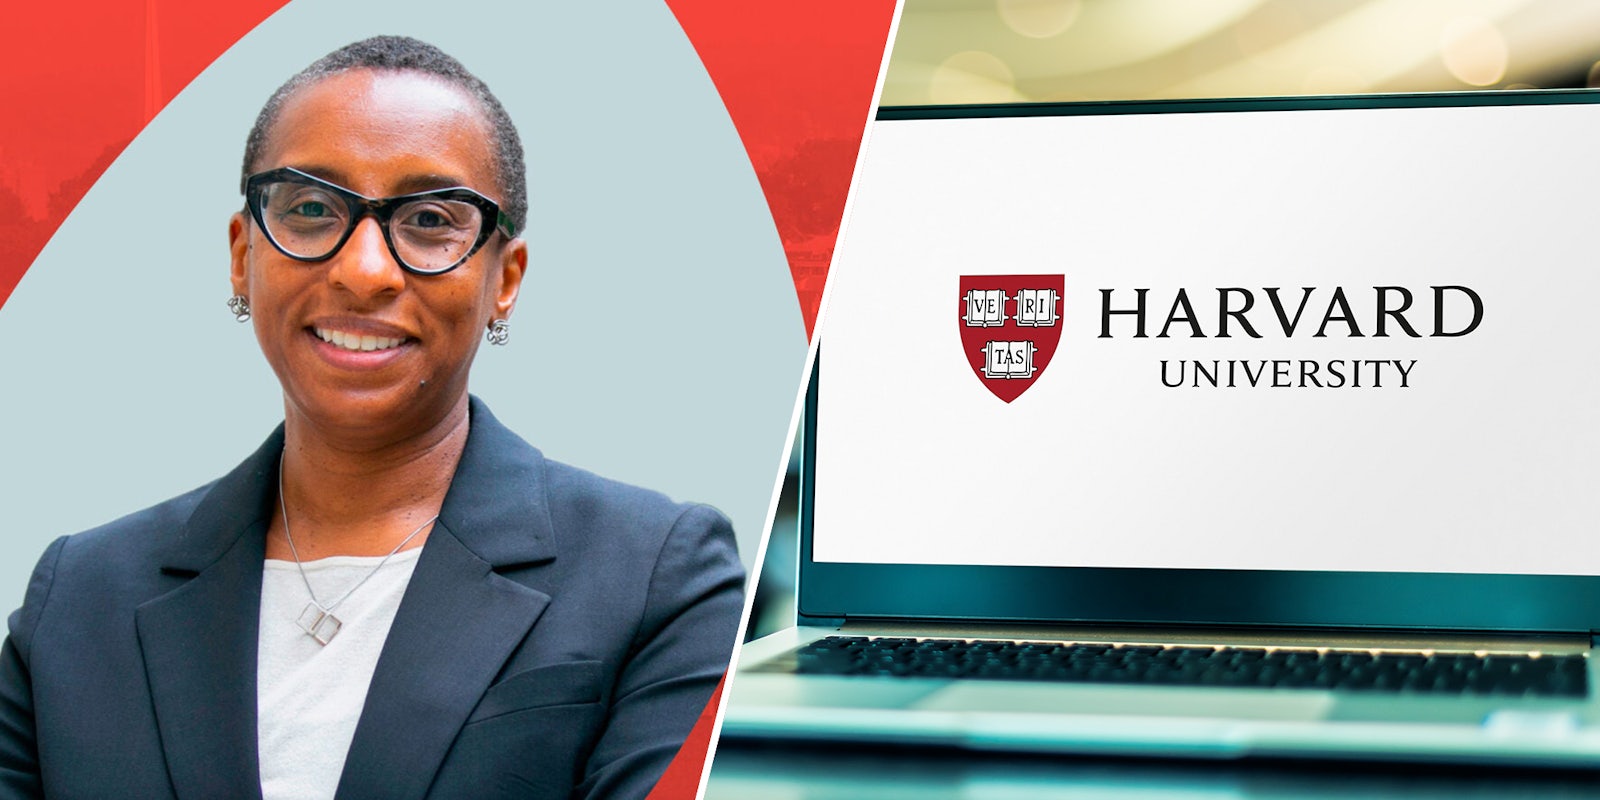 Plagiarism dubbed 'new conservative weapon' after Harvard president resigns